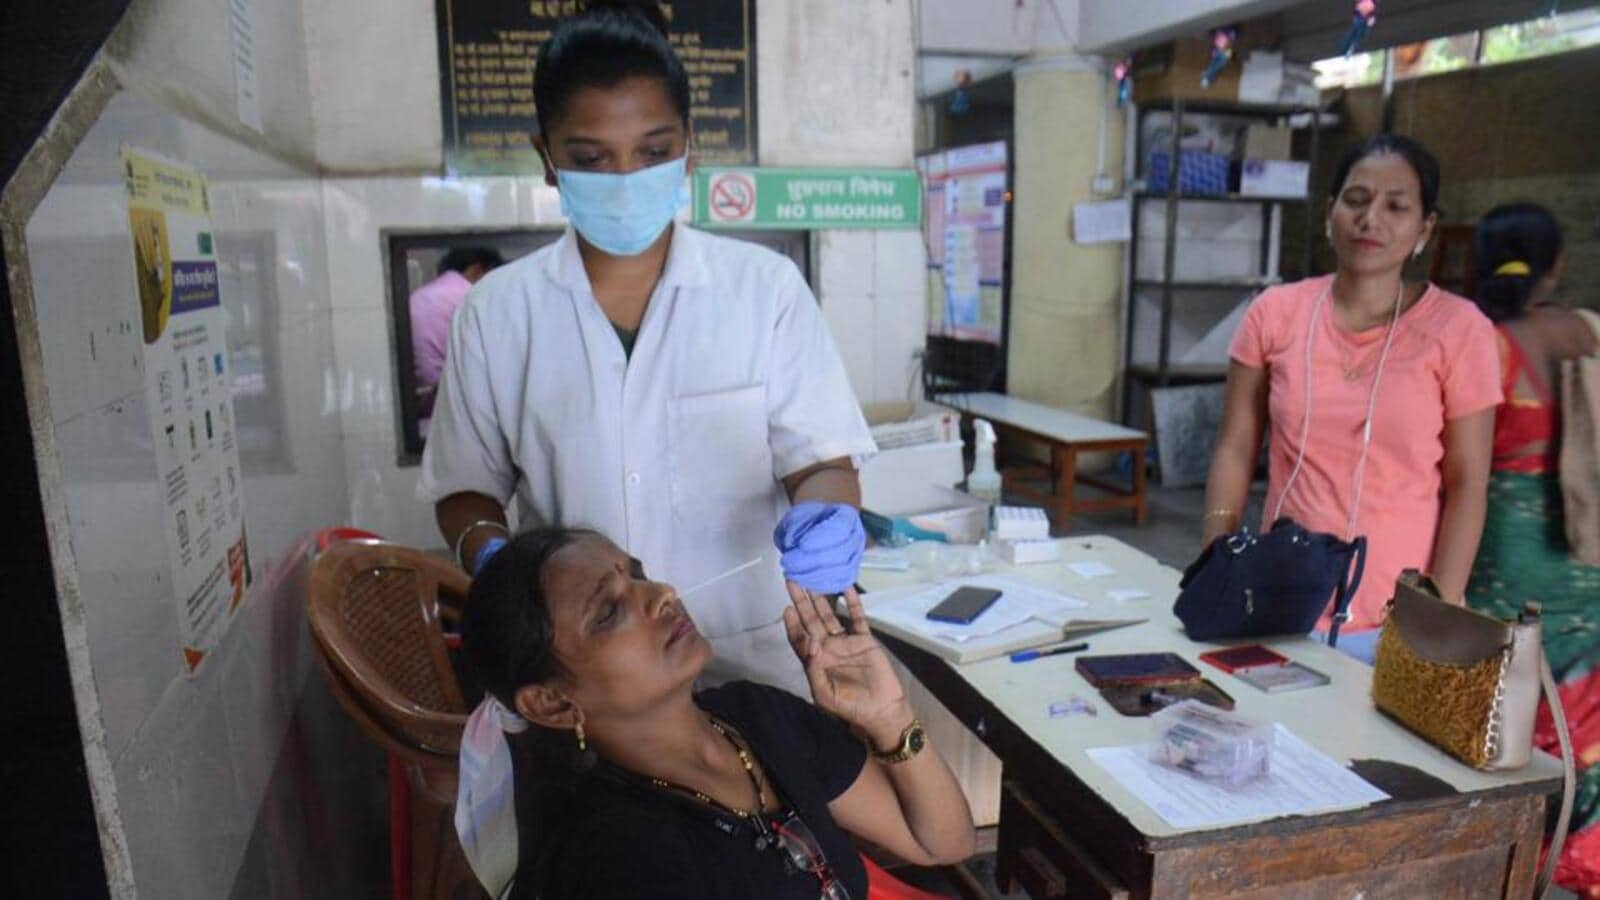 As schools reopen, BMC to ramp up 12-18 age group vaccination | Mumbai news